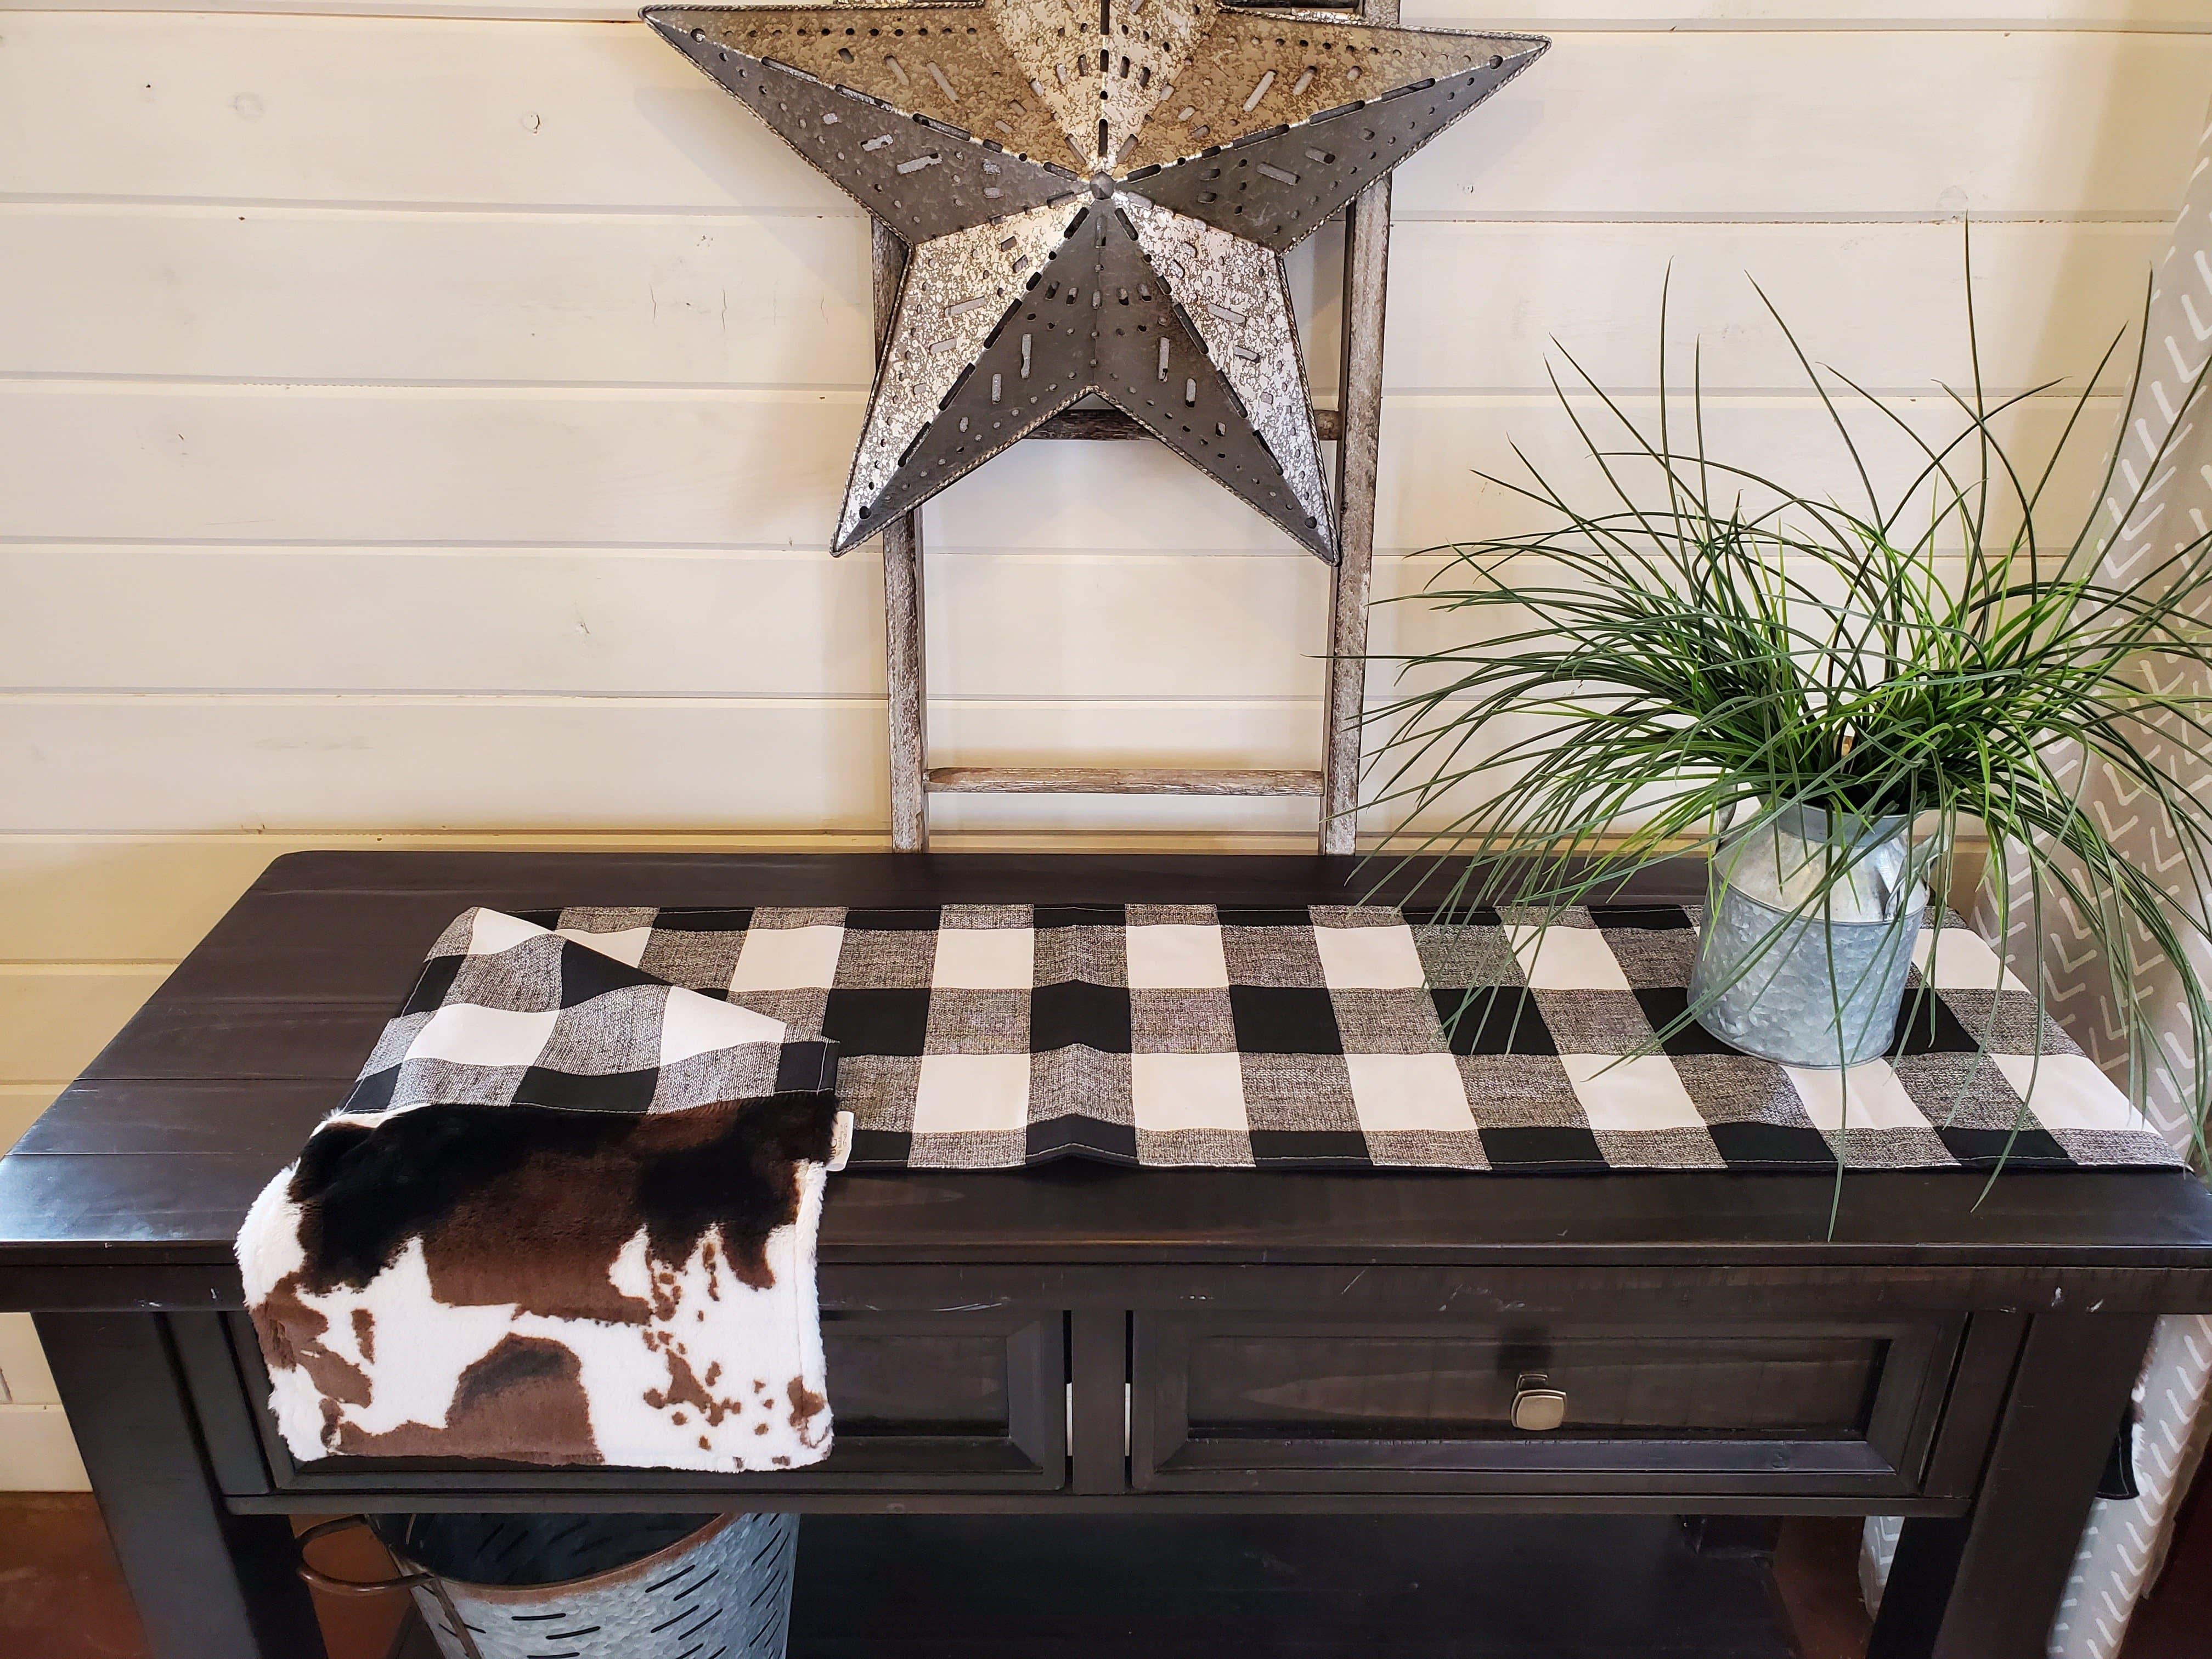 Home Decor- Table Runner -Black White Check with Cow Minky decorative ends